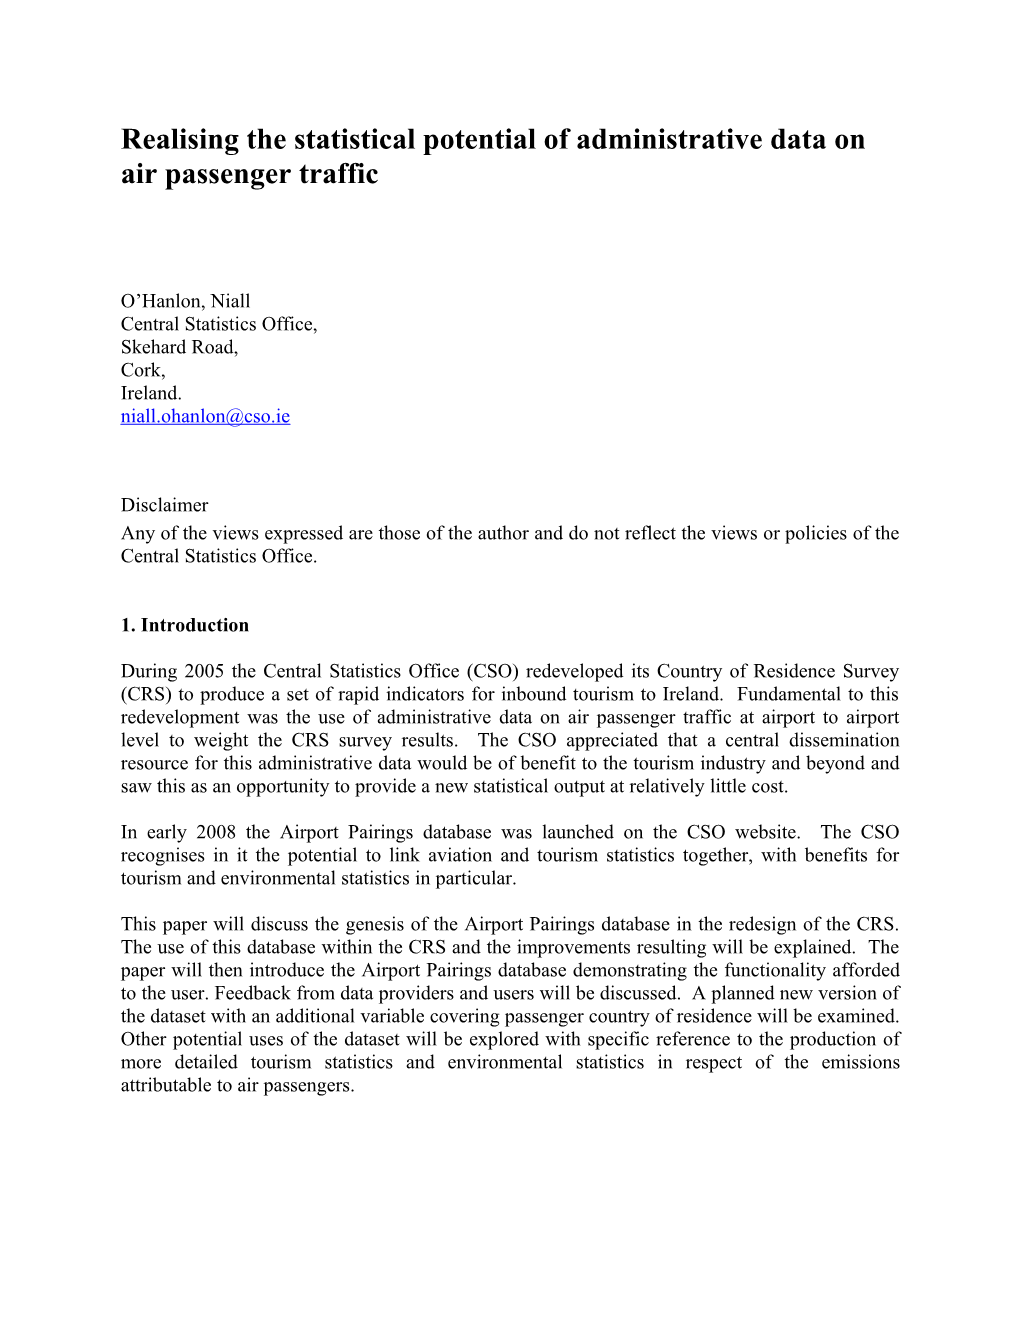 Realising the Statistical Potential of Administrative Data on Air Passenger Traffic